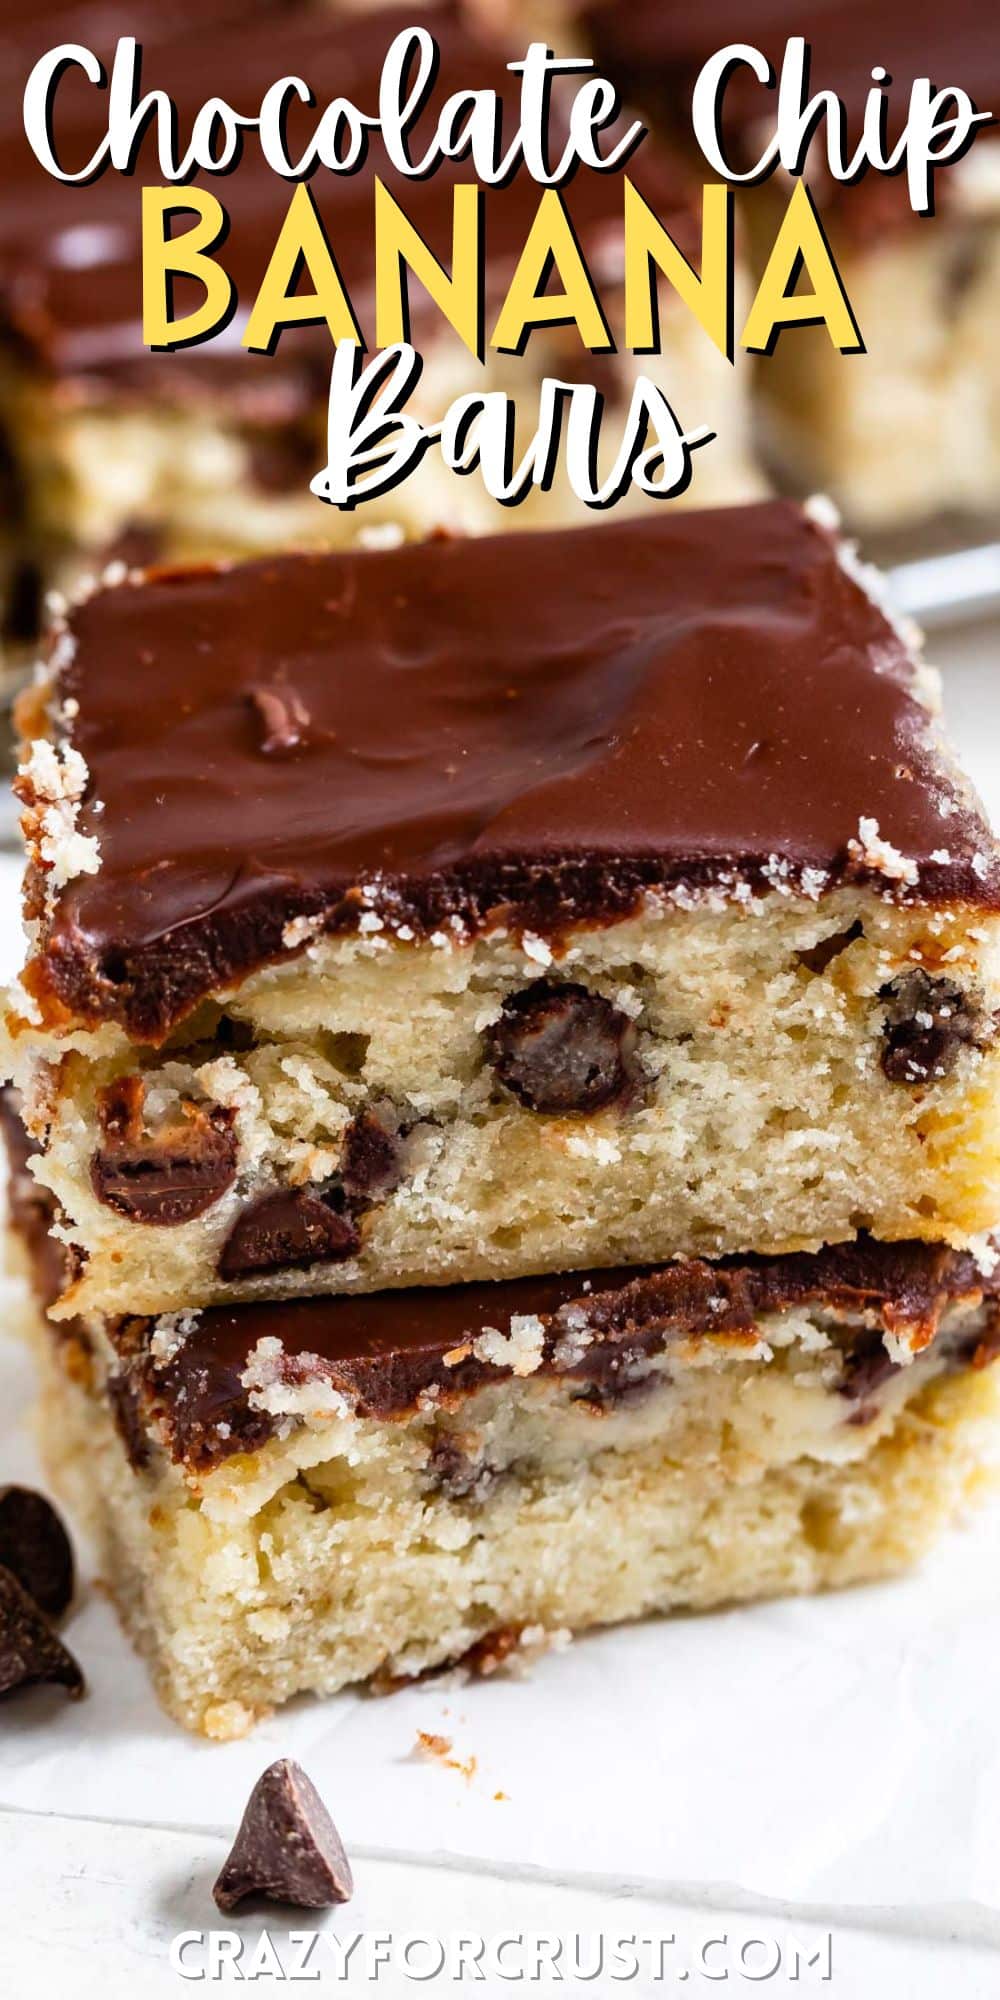 stacked banana bars with chocolate chips baked in with words on the image.